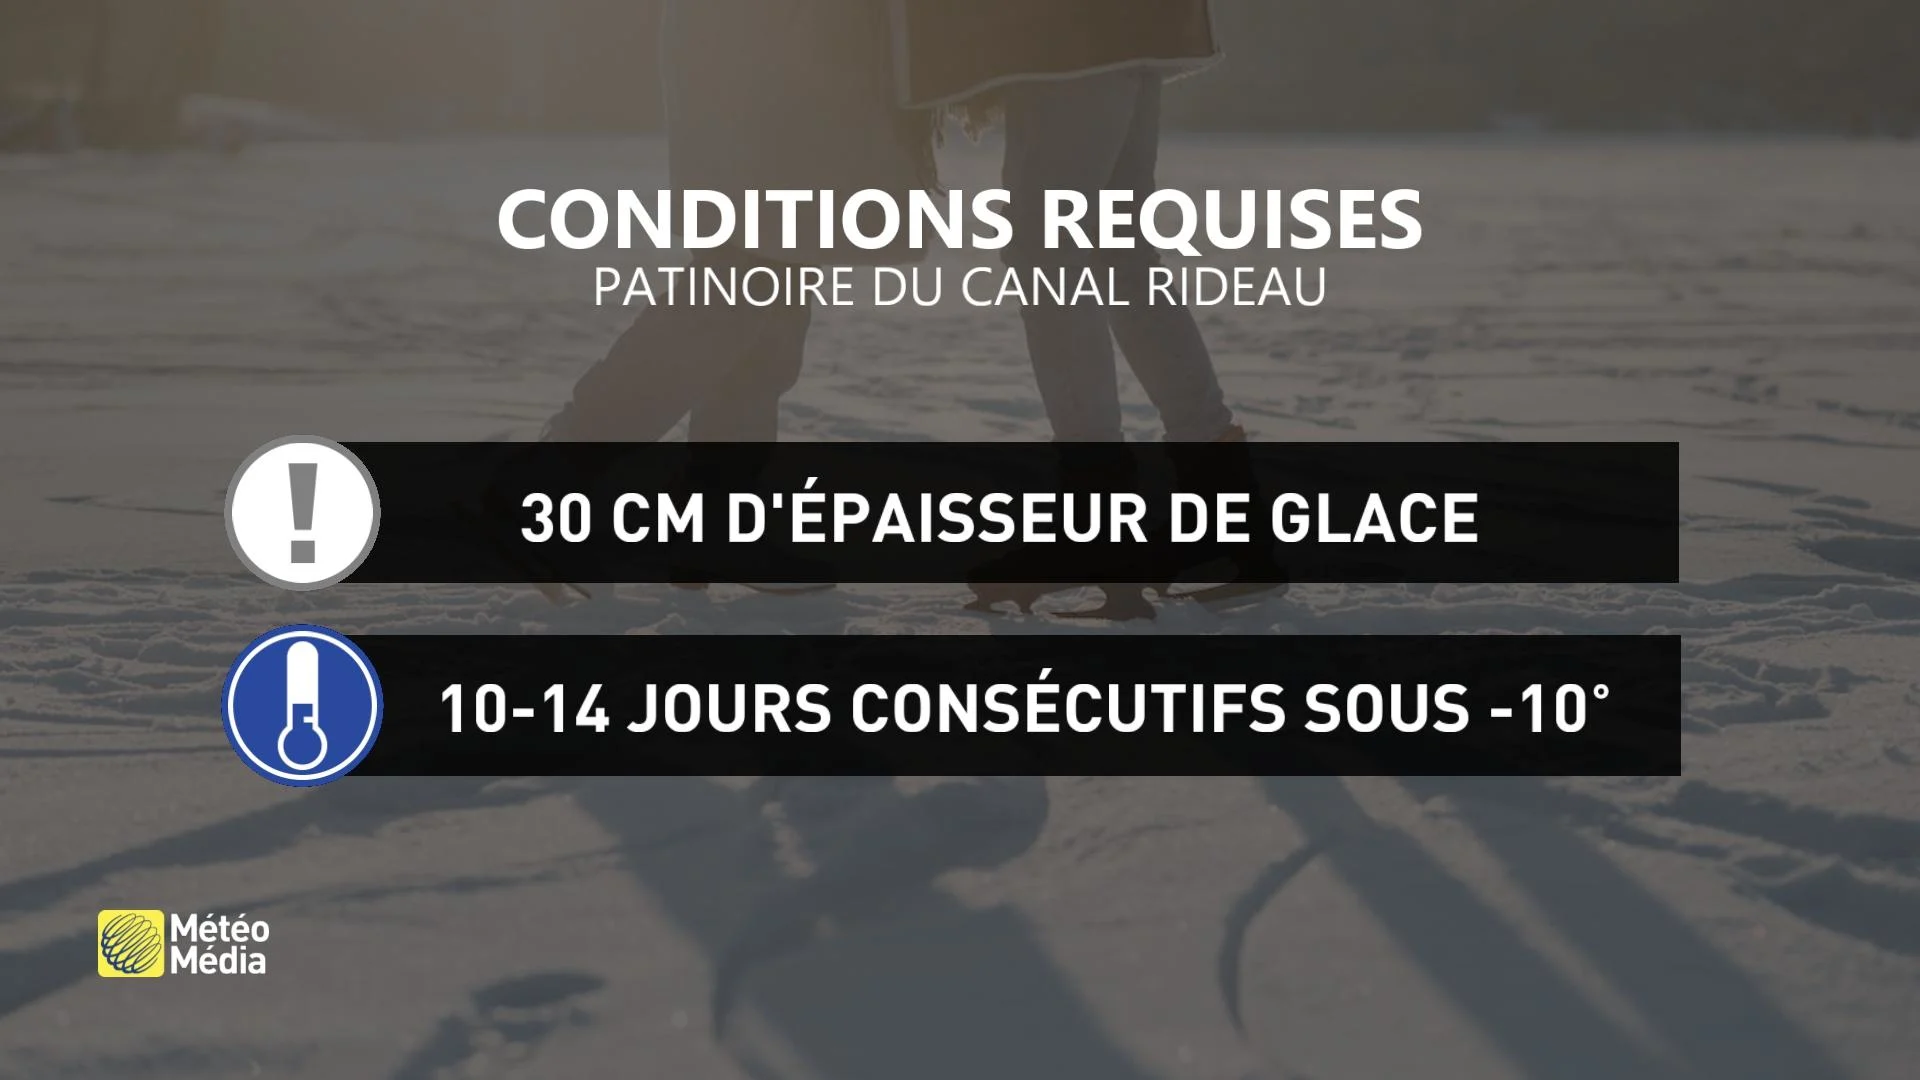 PATINOIRES3 RIDEAU CONDITIONS